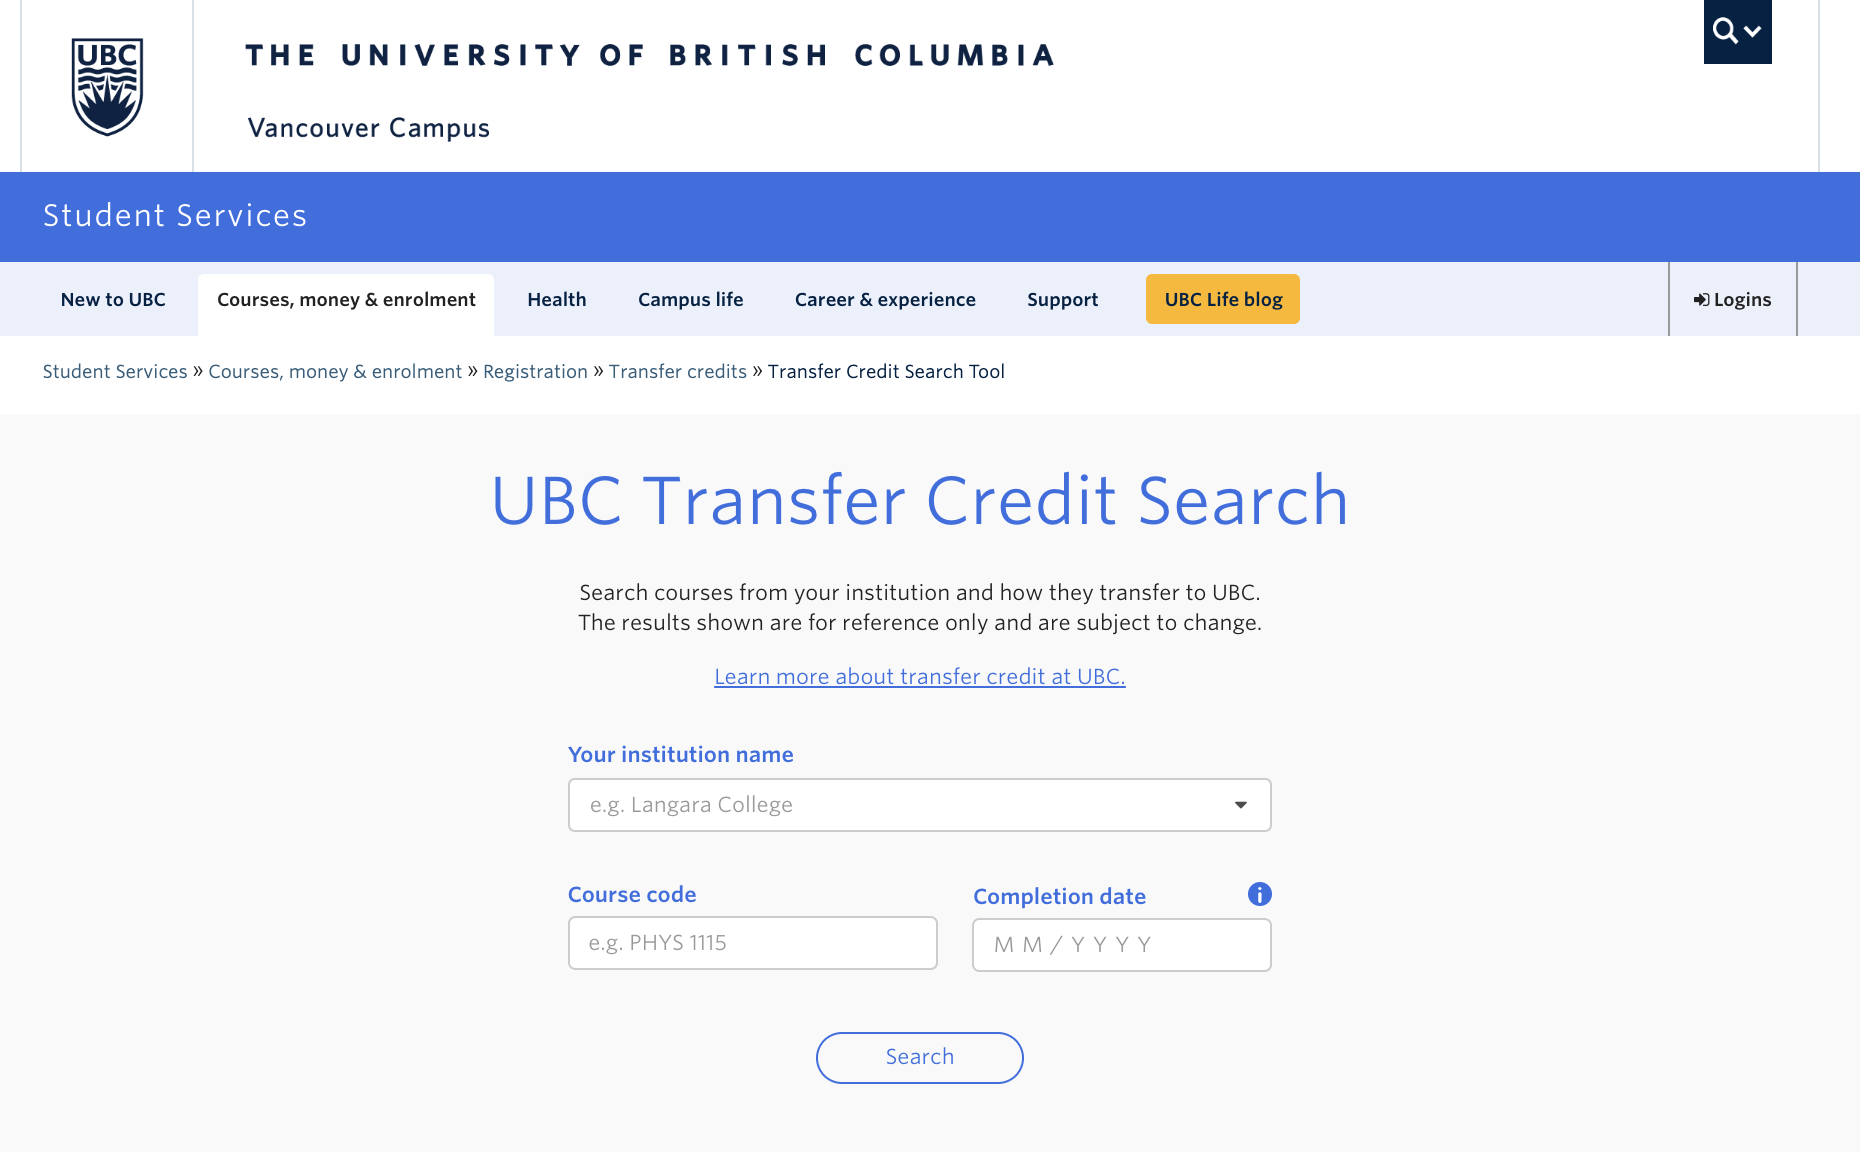 Transfer credit search tool